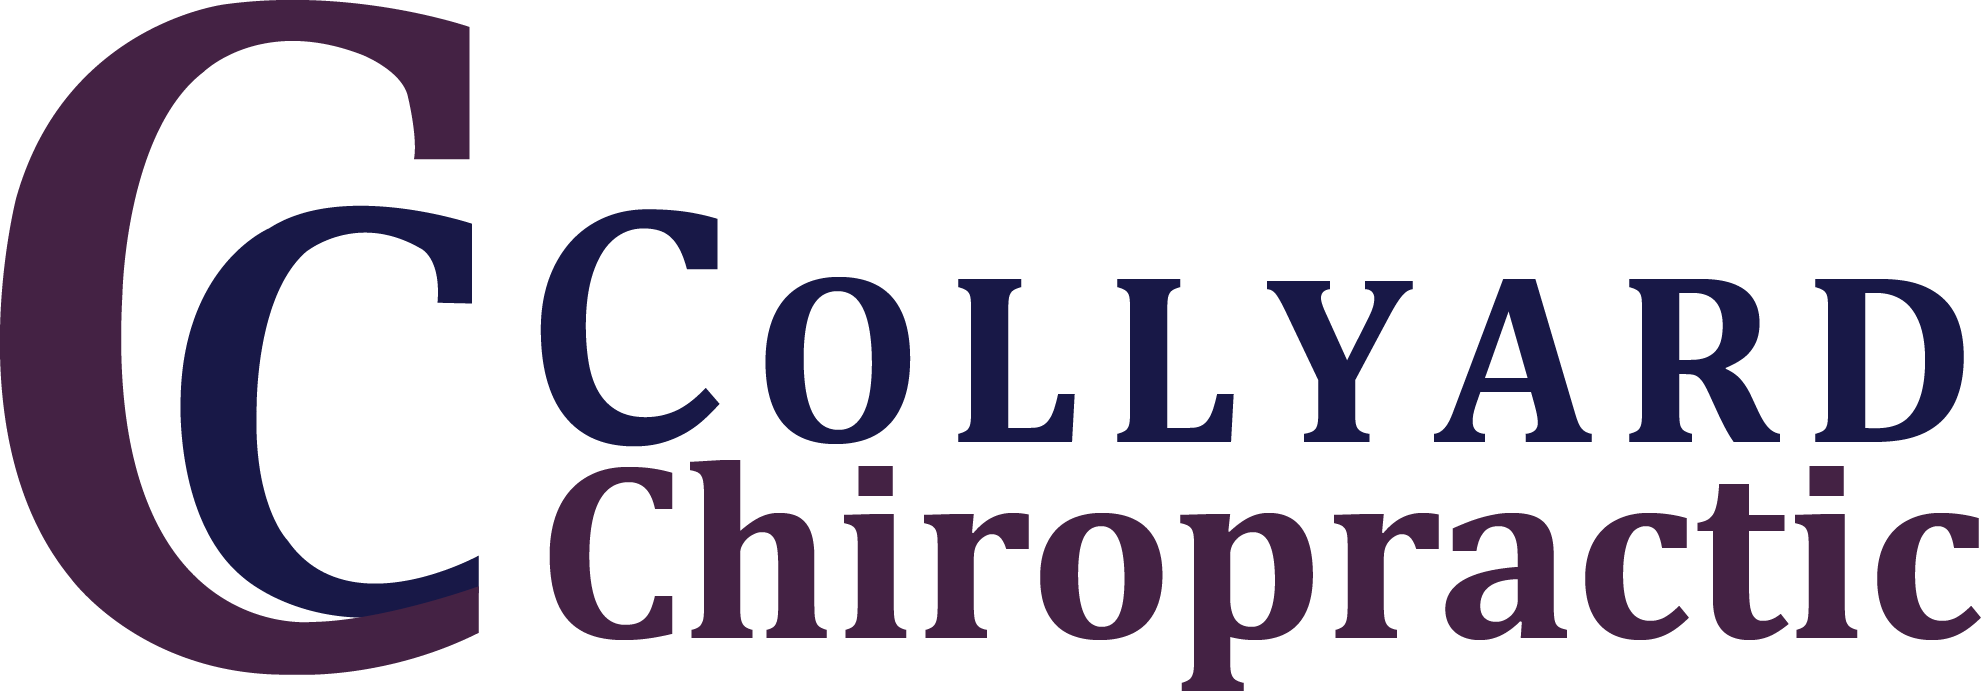 Collyard Chiropractic's Image